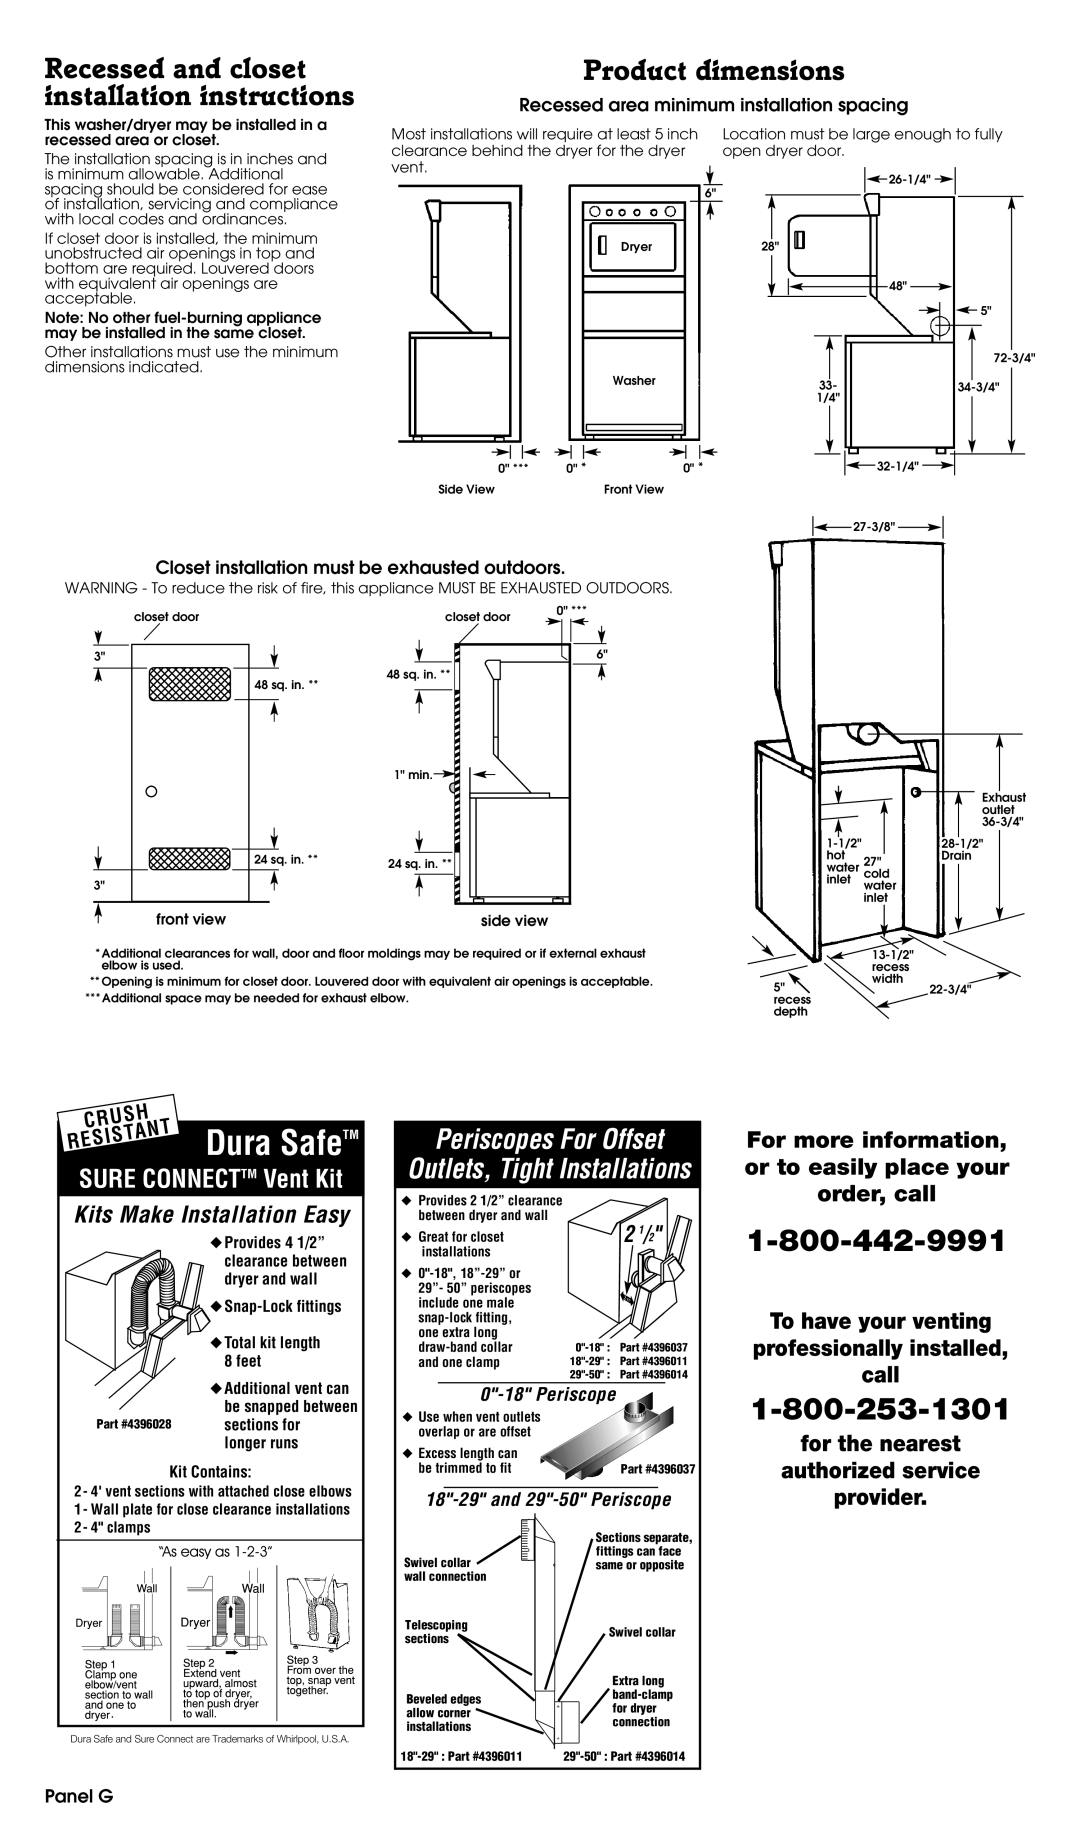 Whirlpool 3395326 Recessed and closet, Product dimensions, installation instructions, Panel G, Dura Safe, 2 1/2, Crush 